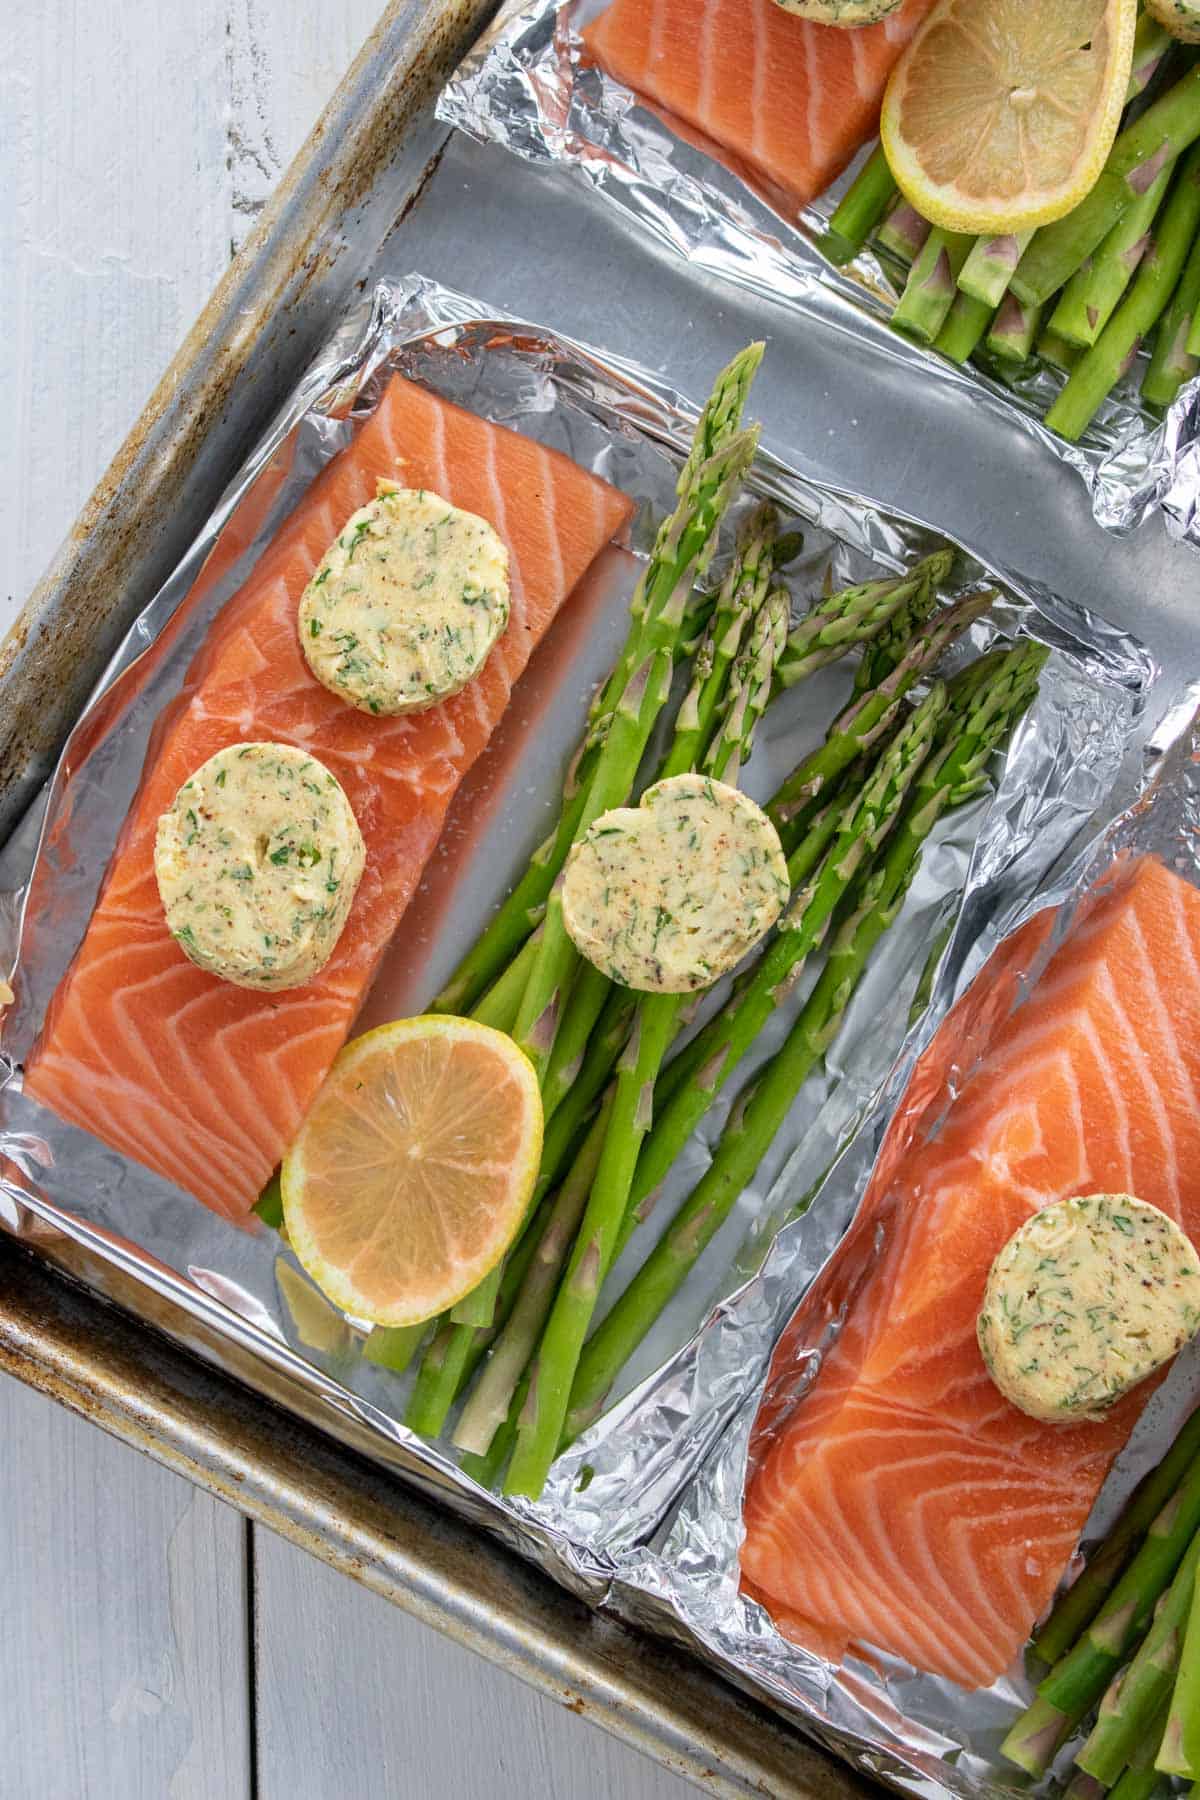 Salmon and asparagus inside foil boat.